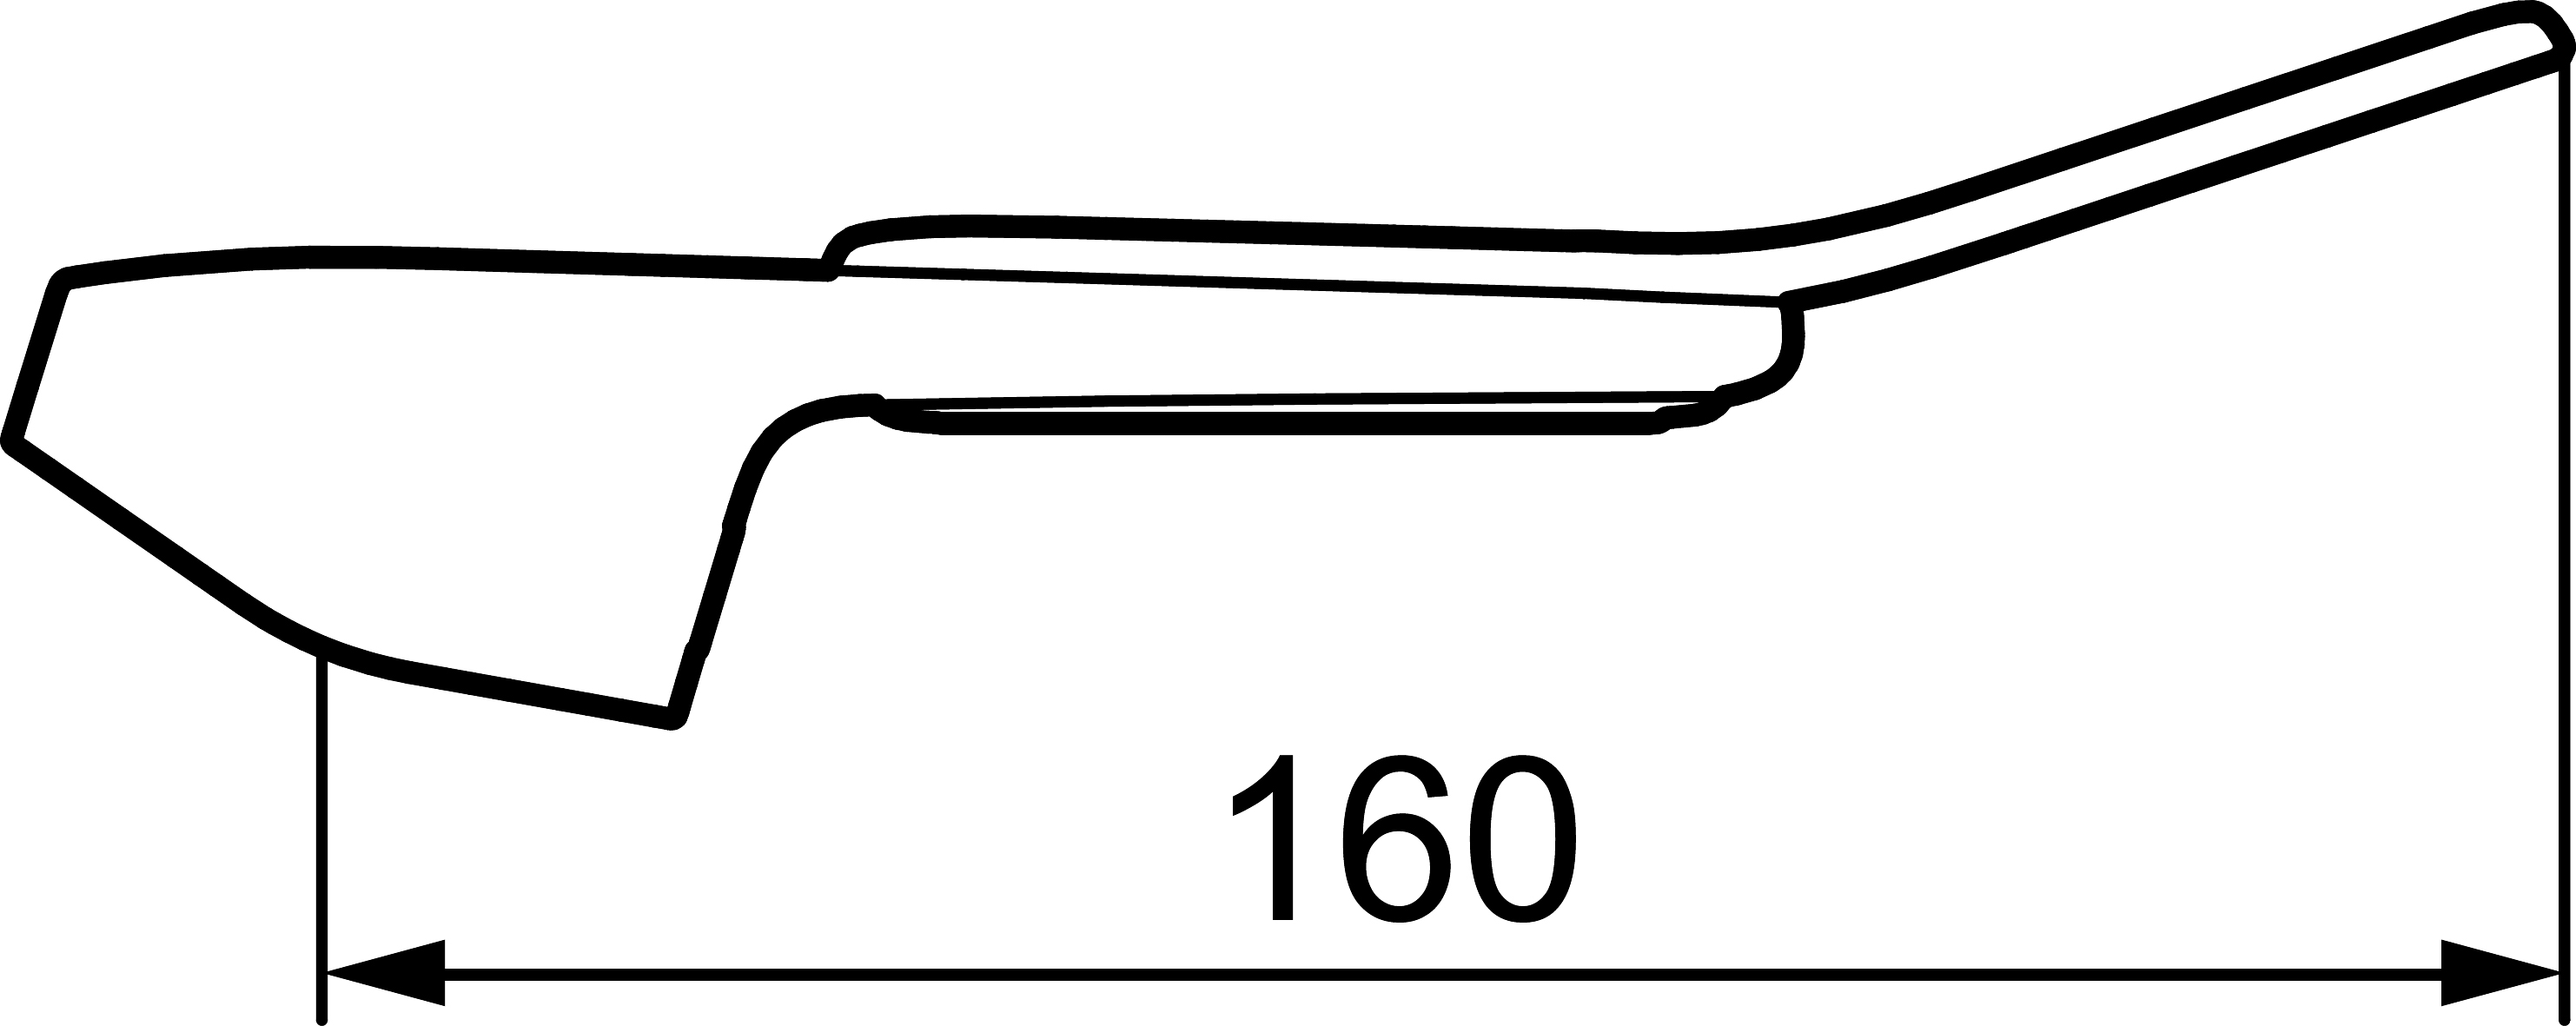 K5850-4000.png